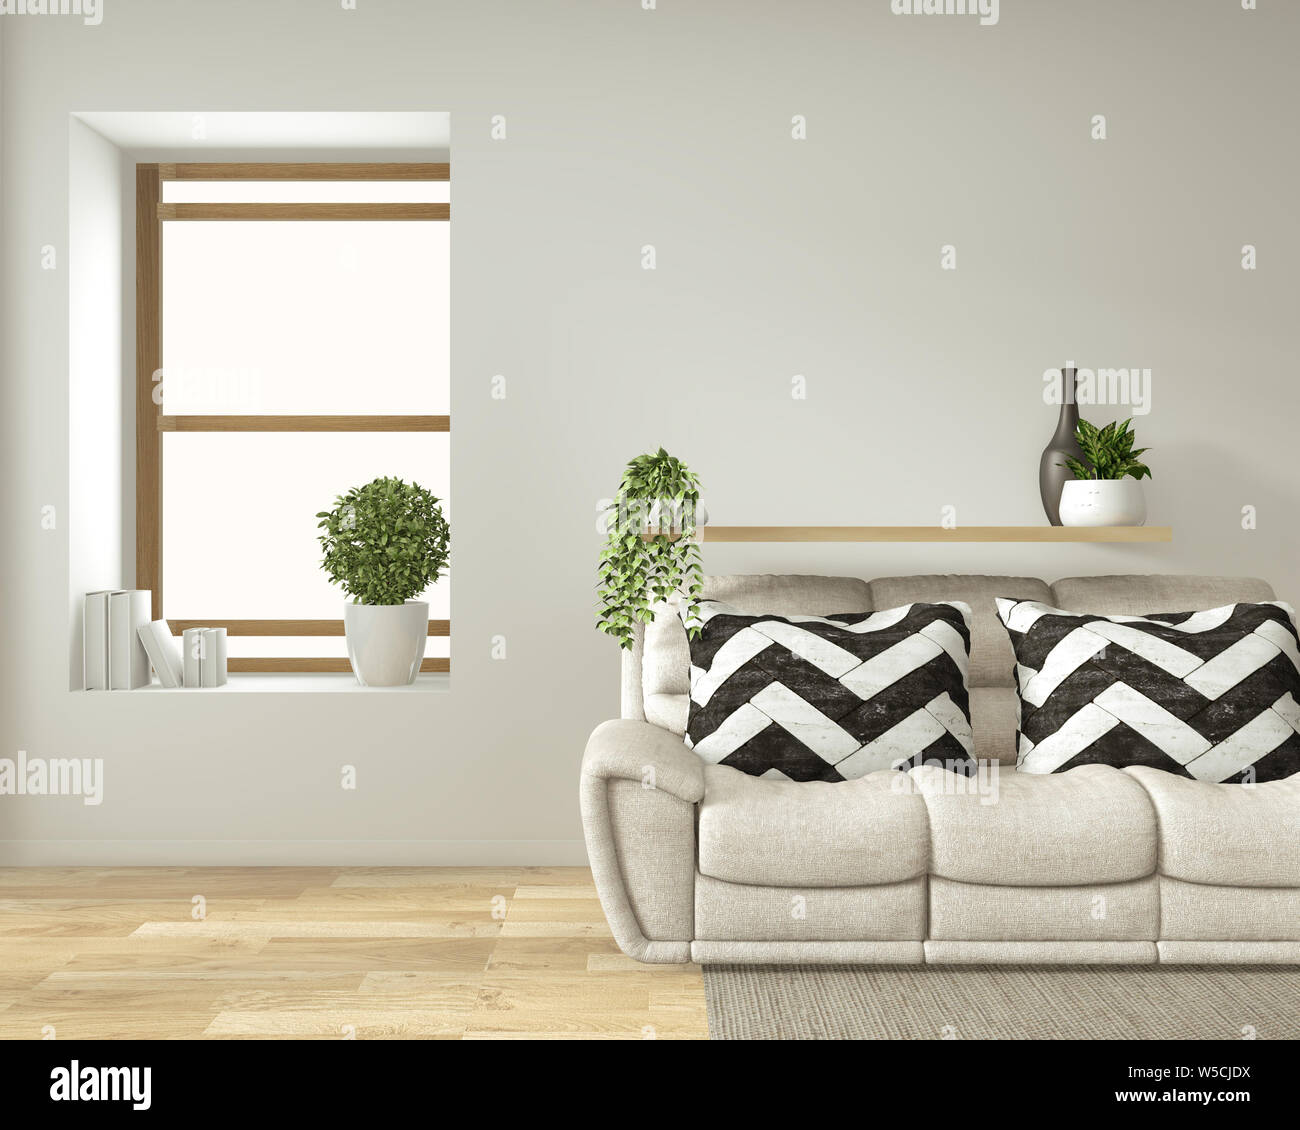 Modern zen living room interior with sofa and green plants japanese minimal design. 3d rendering. Stock Photo